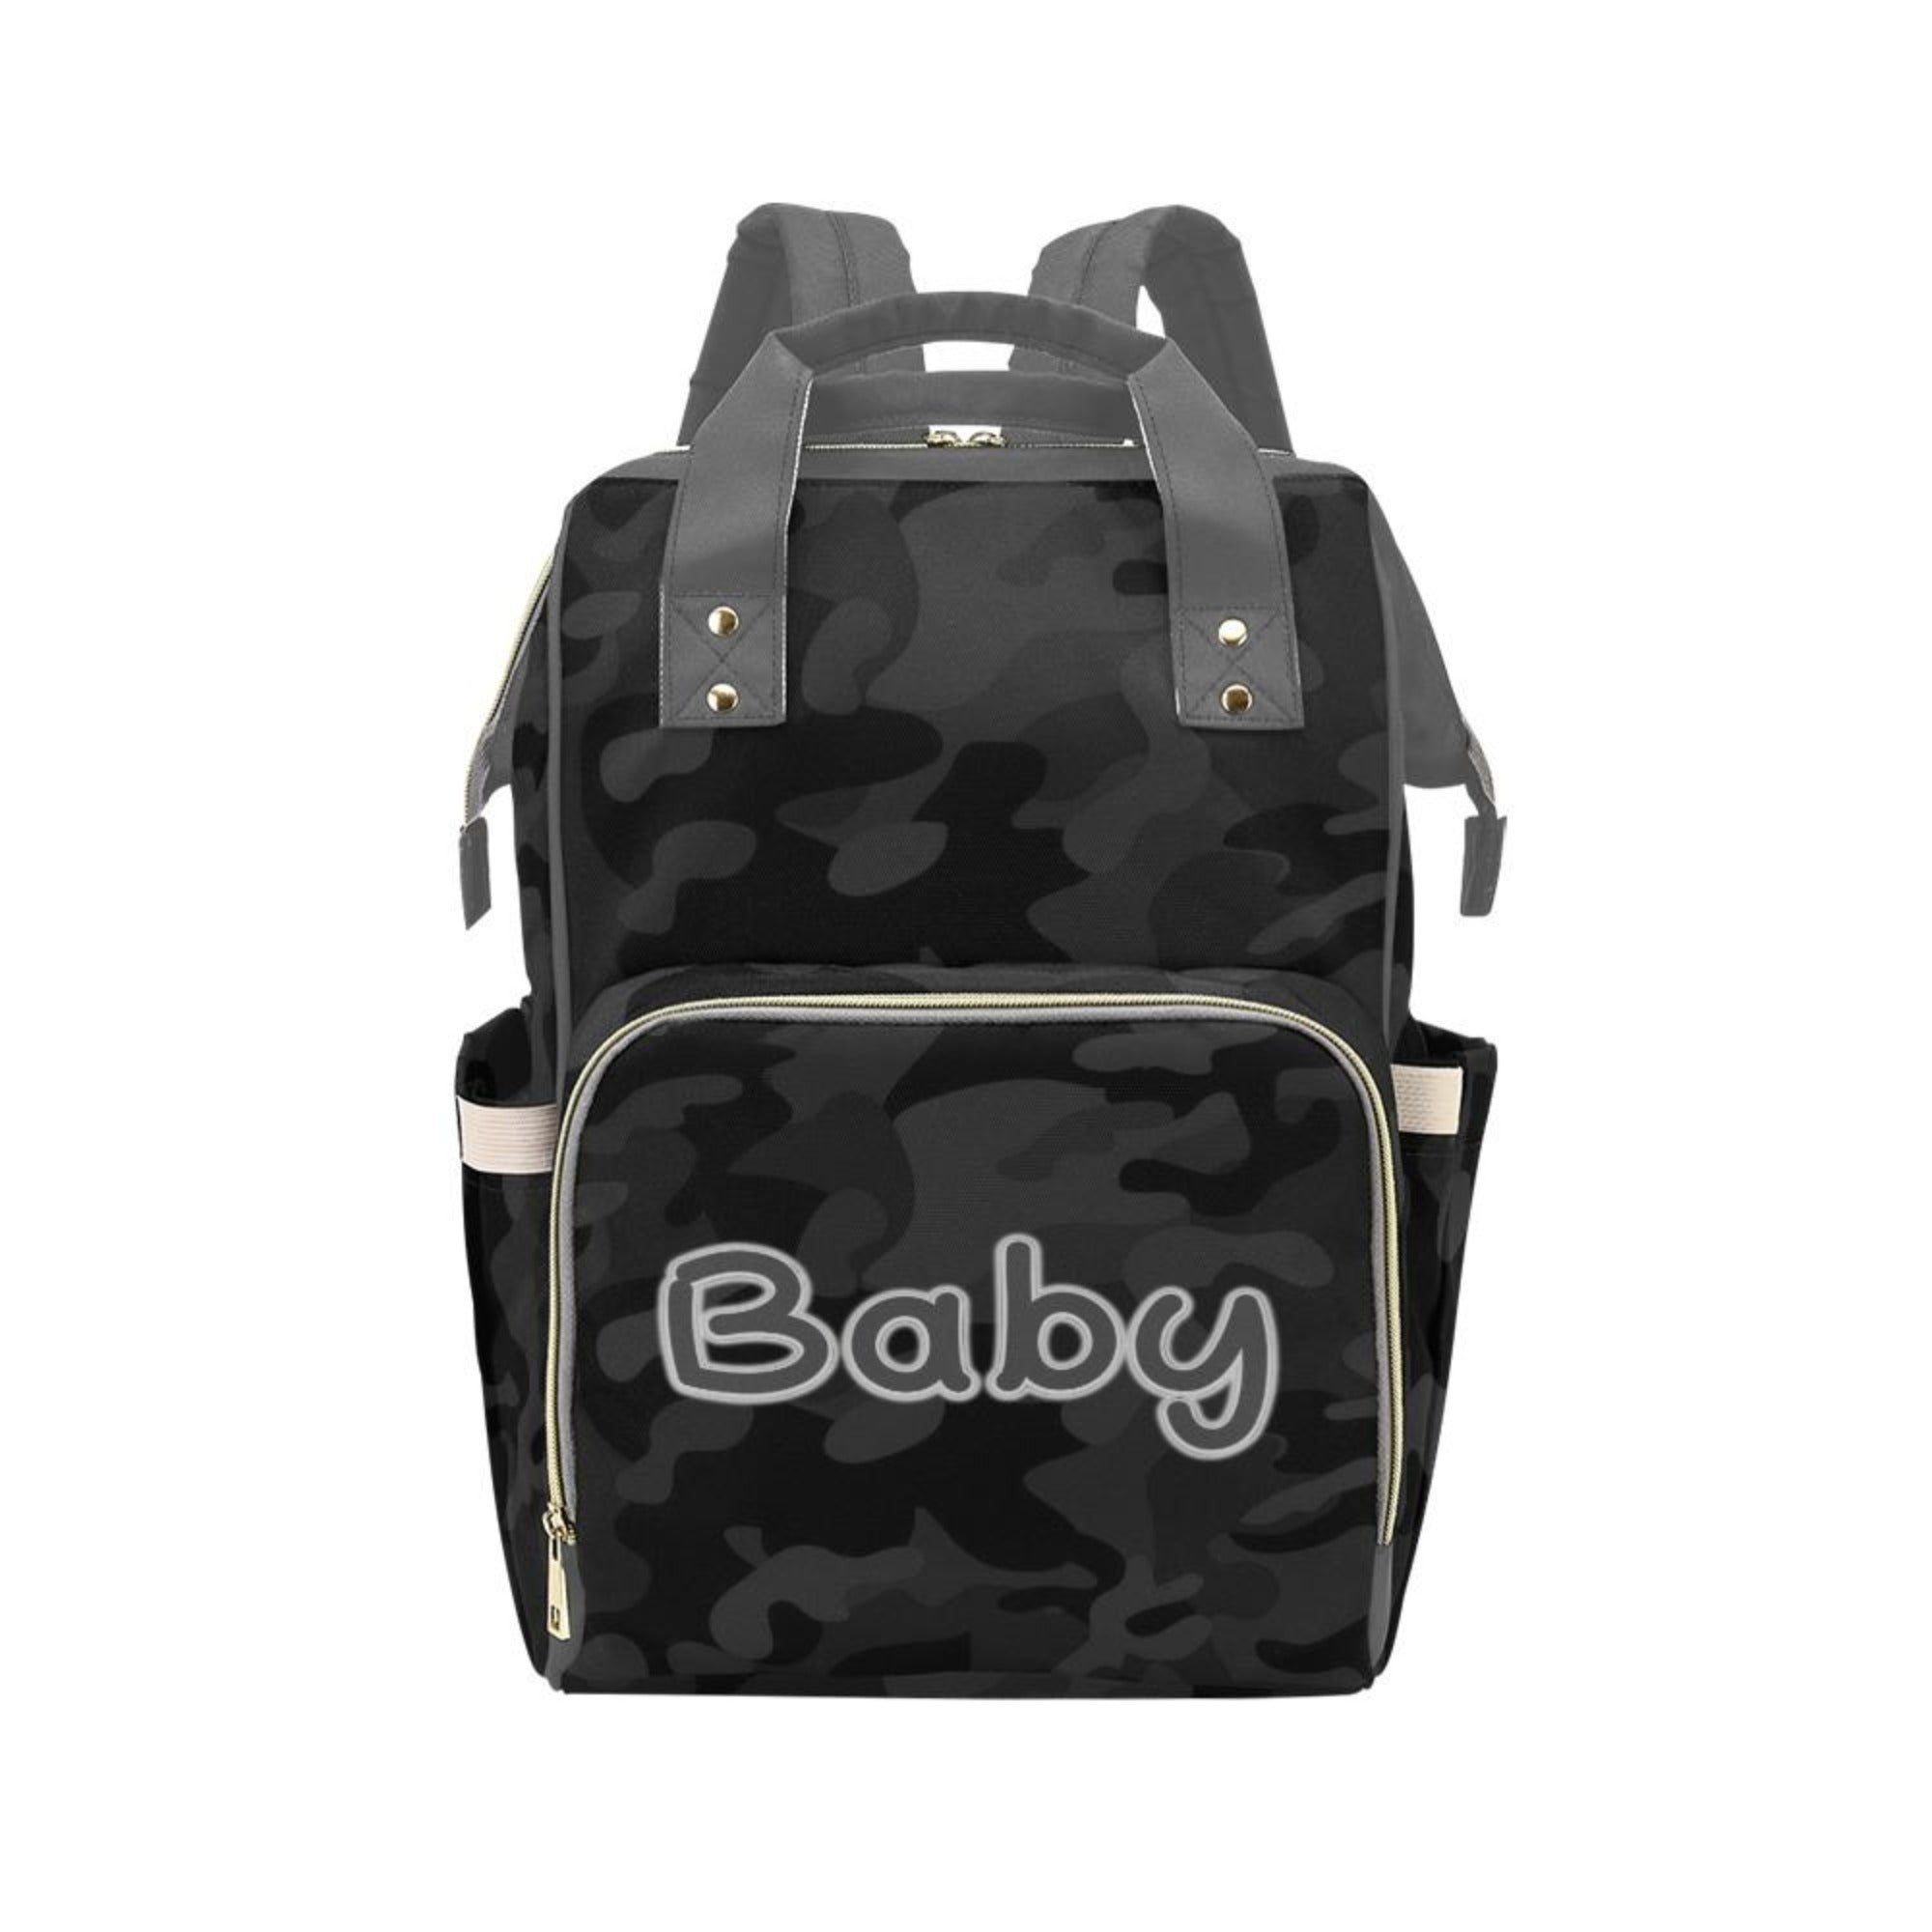 Mother Bag And Multi Compartment For Newborn Baby Messenger Bag for  Maternity Shoulder Bag Diaper Mama